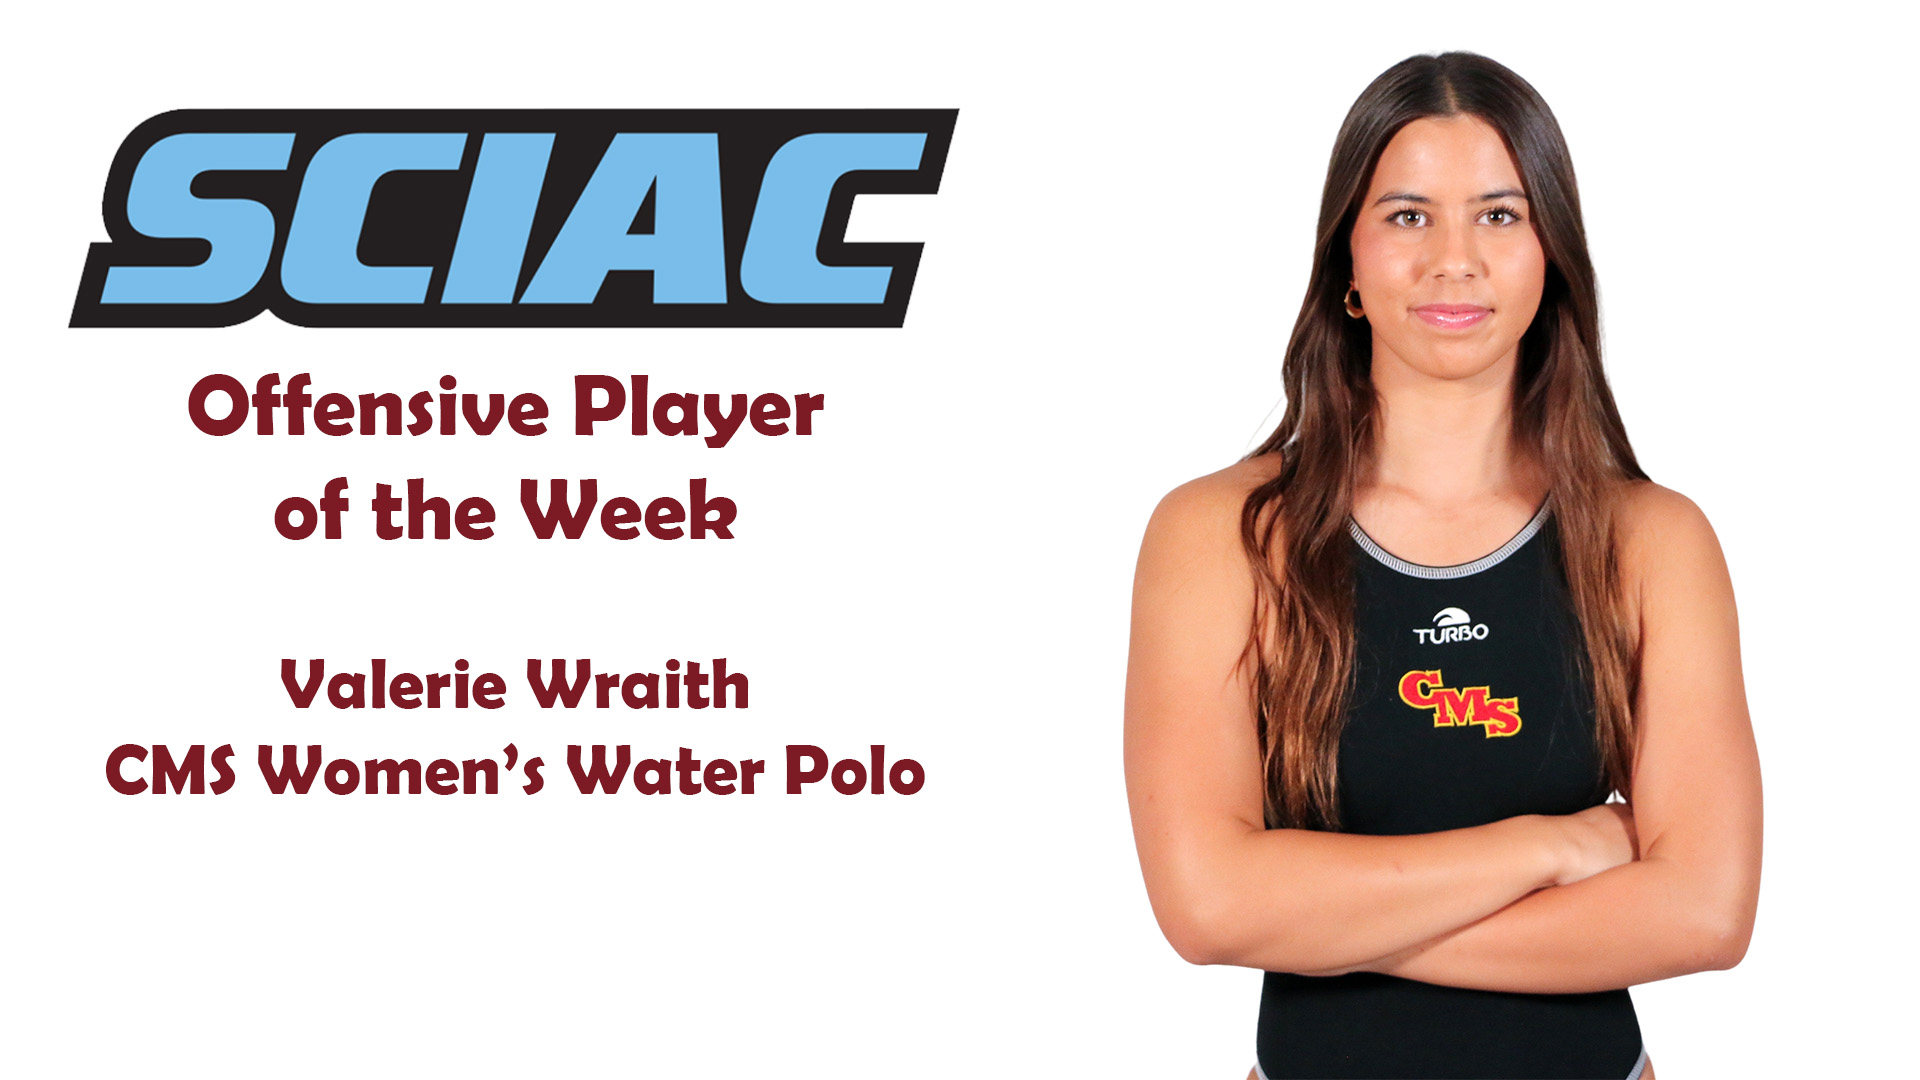 Valerie Wraith posed shot with the SCIAC logo